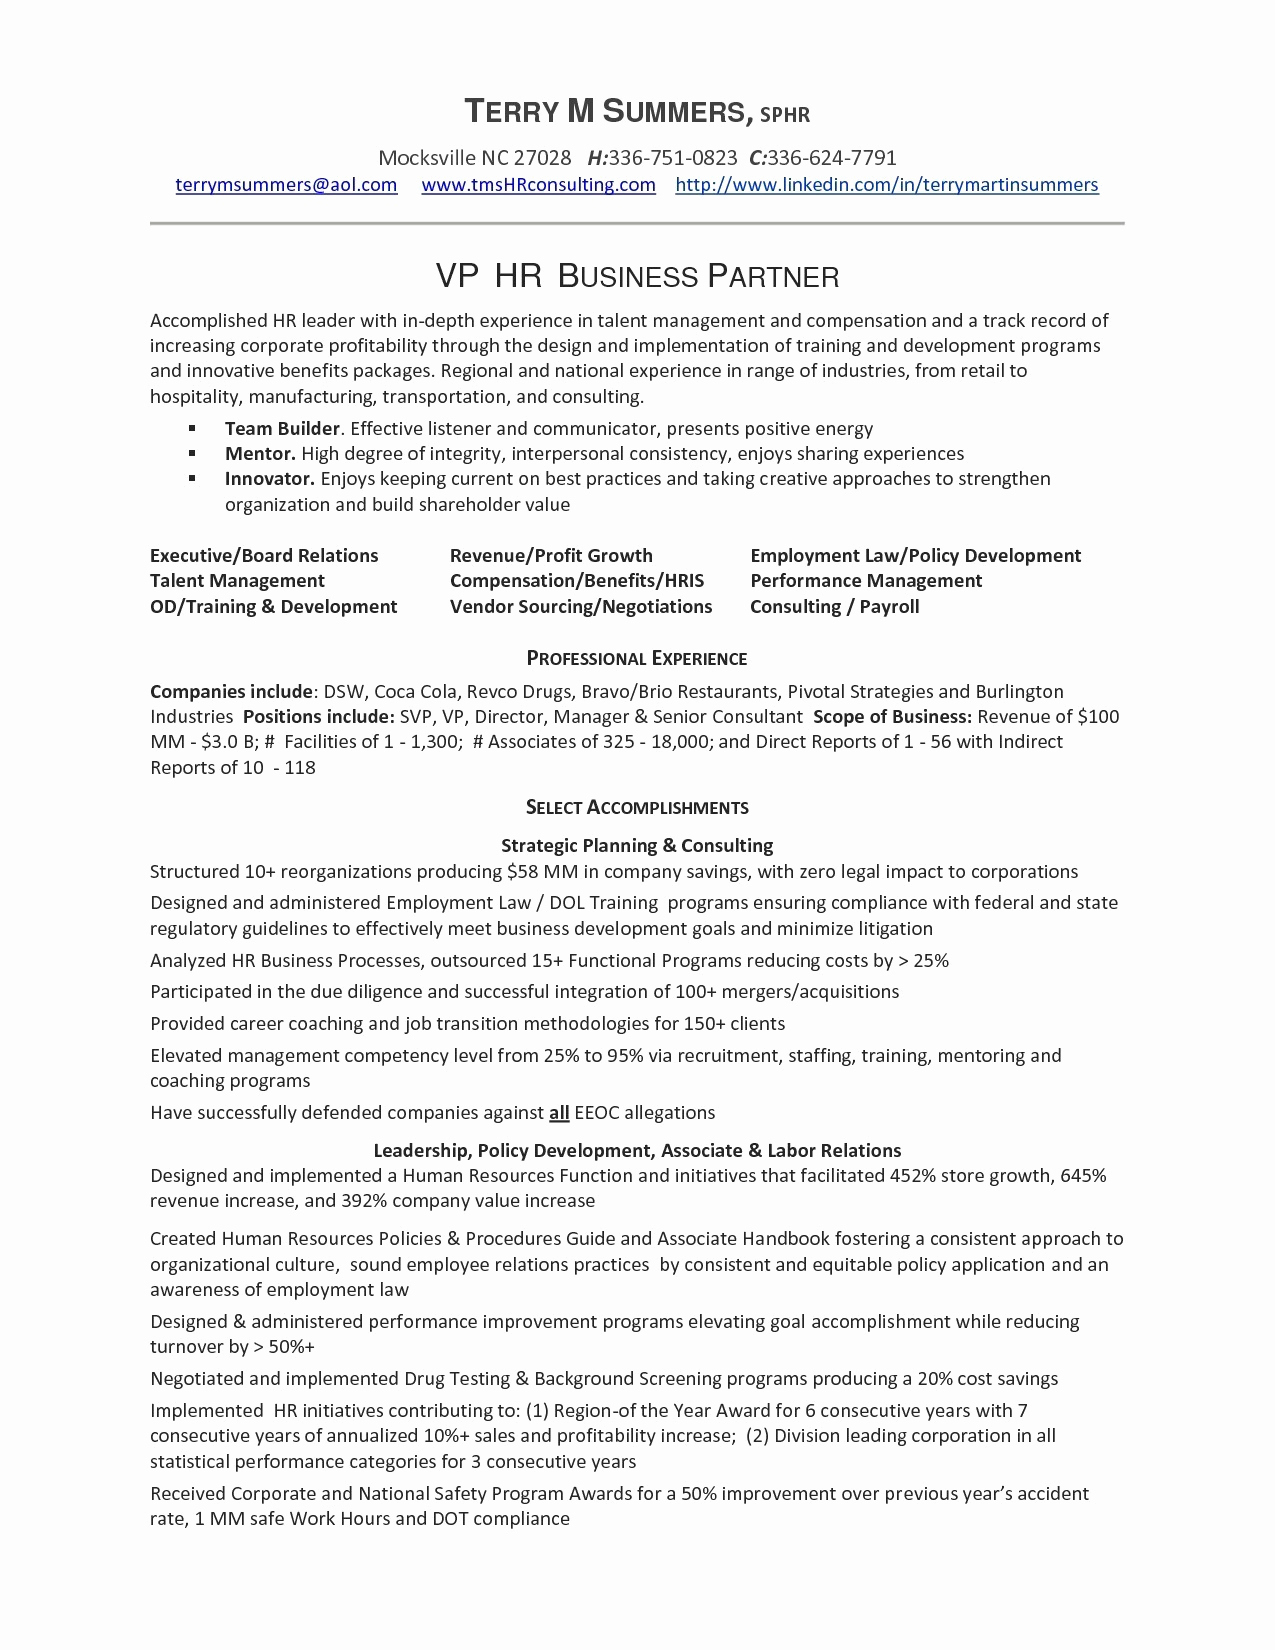 12 Mergers And Acquisitions Resume Template Samples | Resume For Mergers And Inquisitions Resume Template